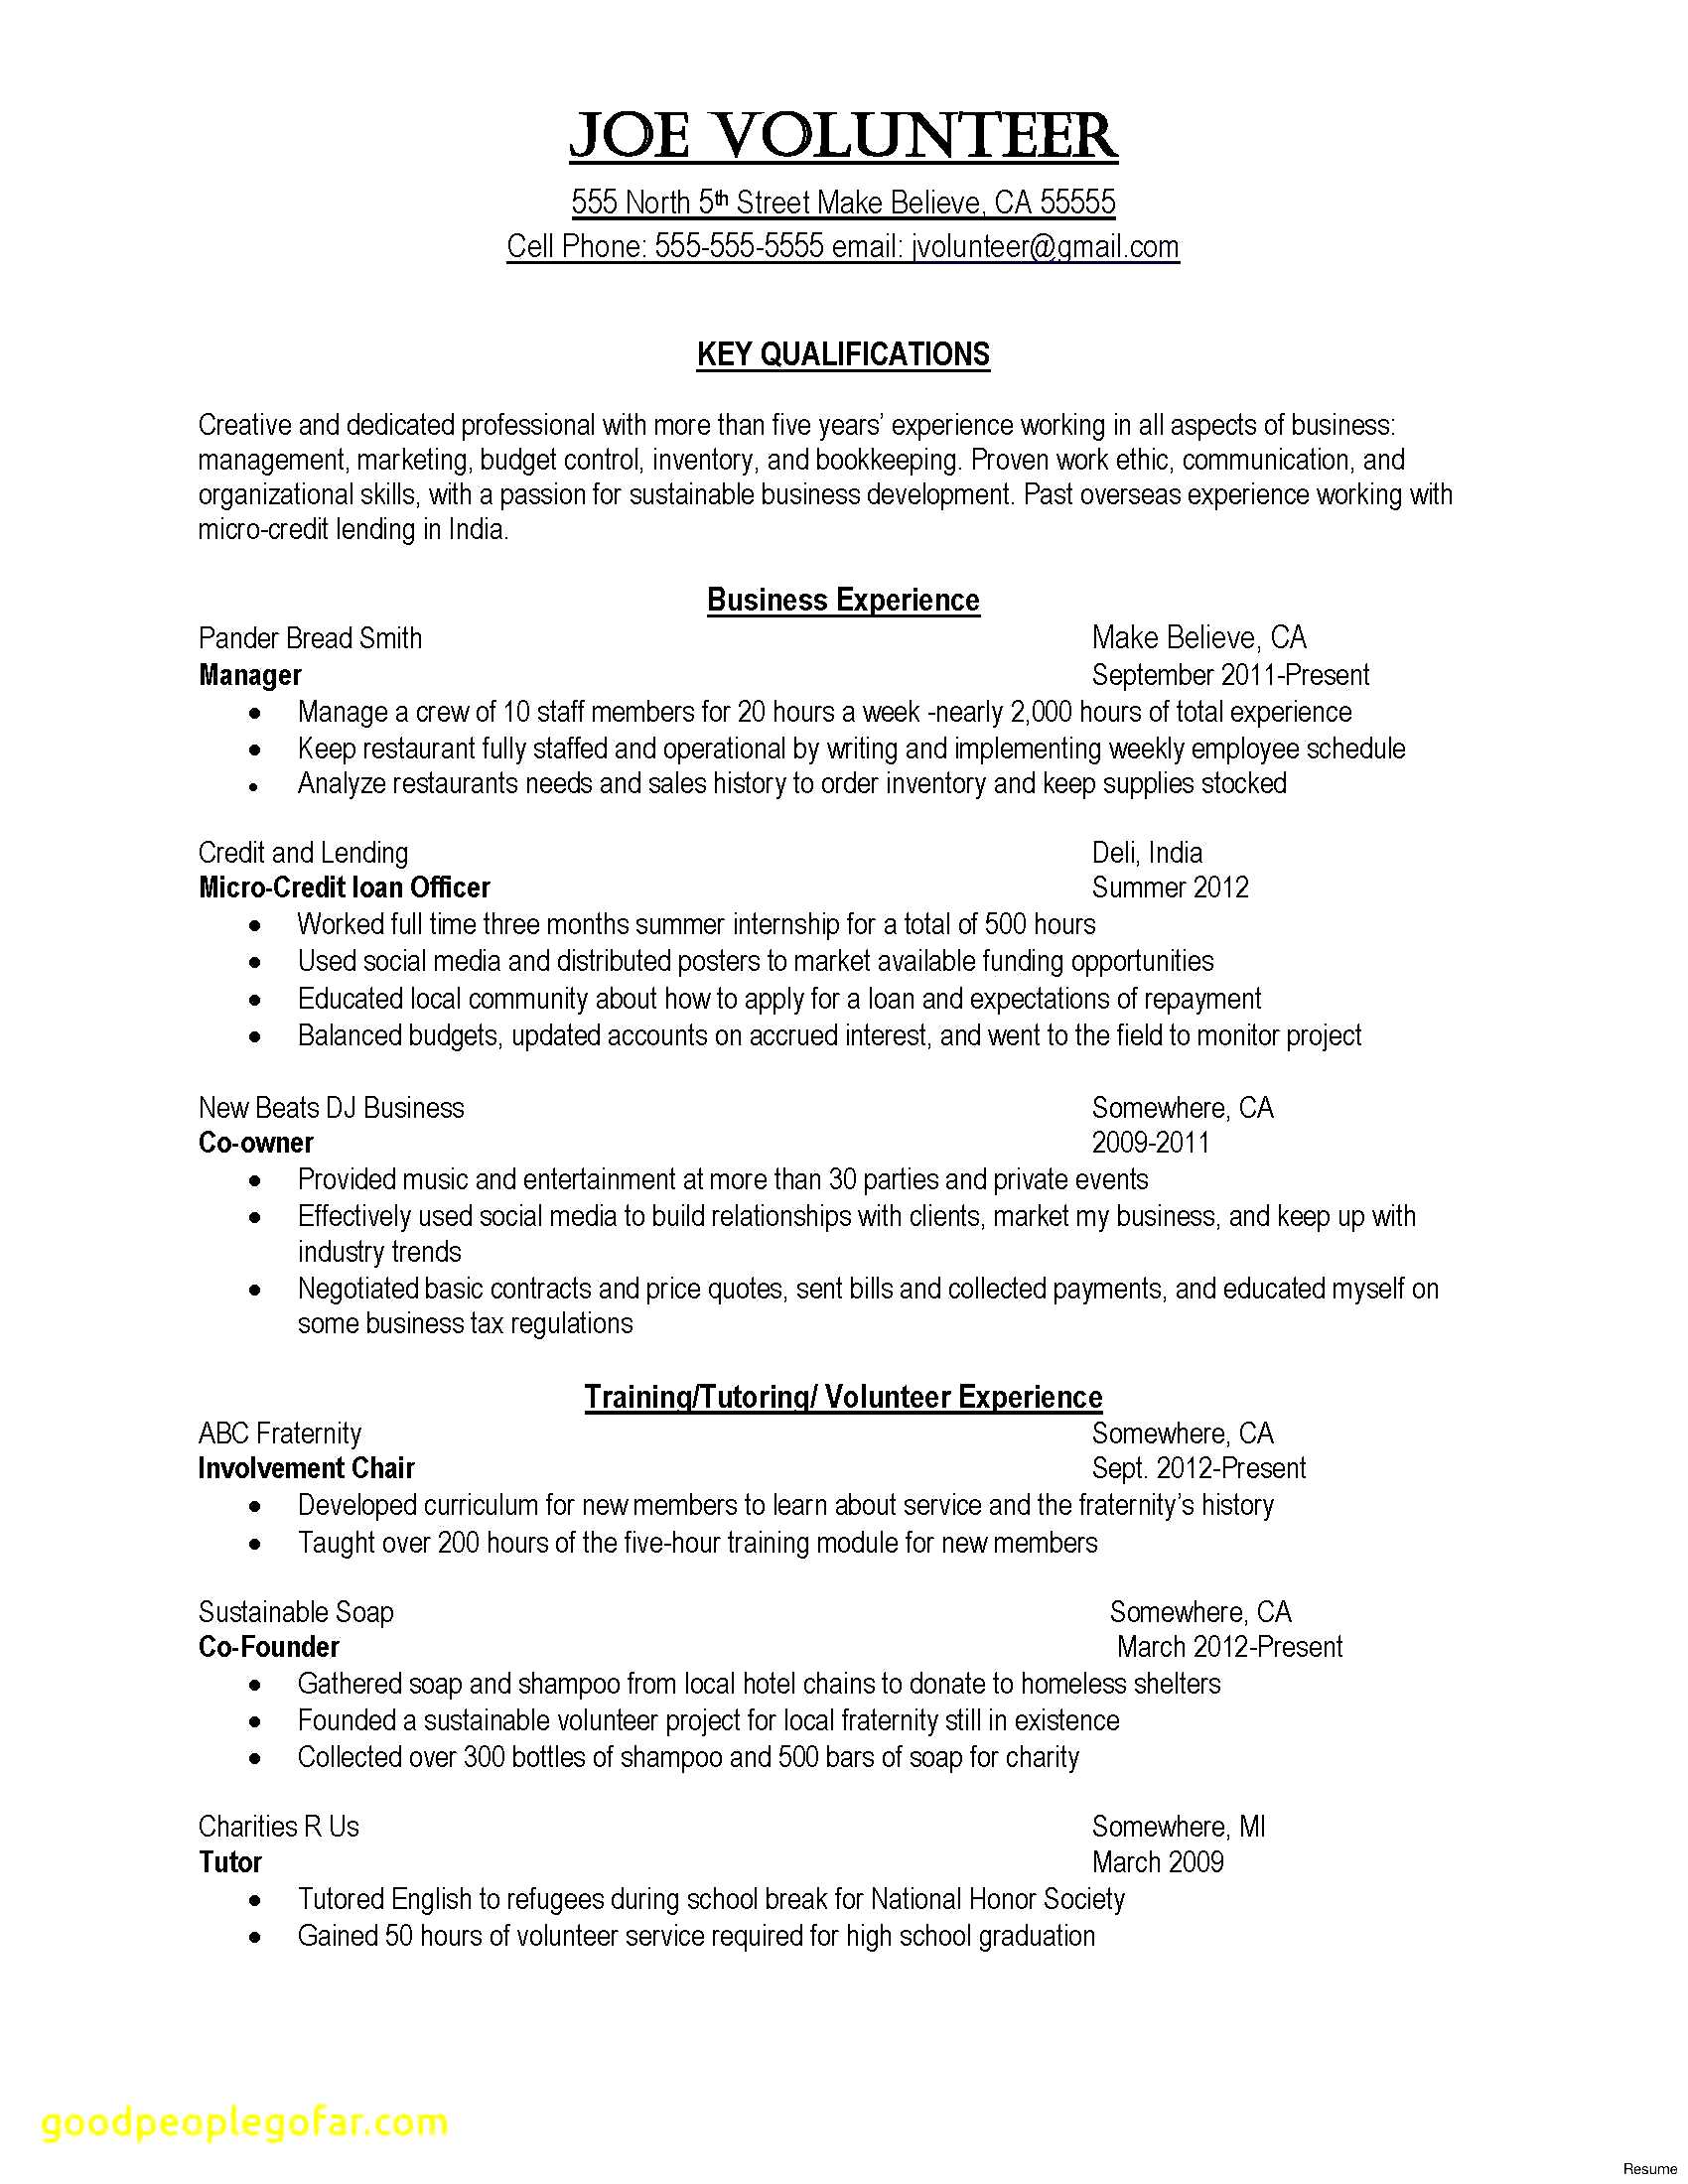 How To Write A Resume For A Job Resume Writing Resume Writing Services In Maryland Big How To Write A Resume For A Job how to write a resume for a job|wikiresume.com